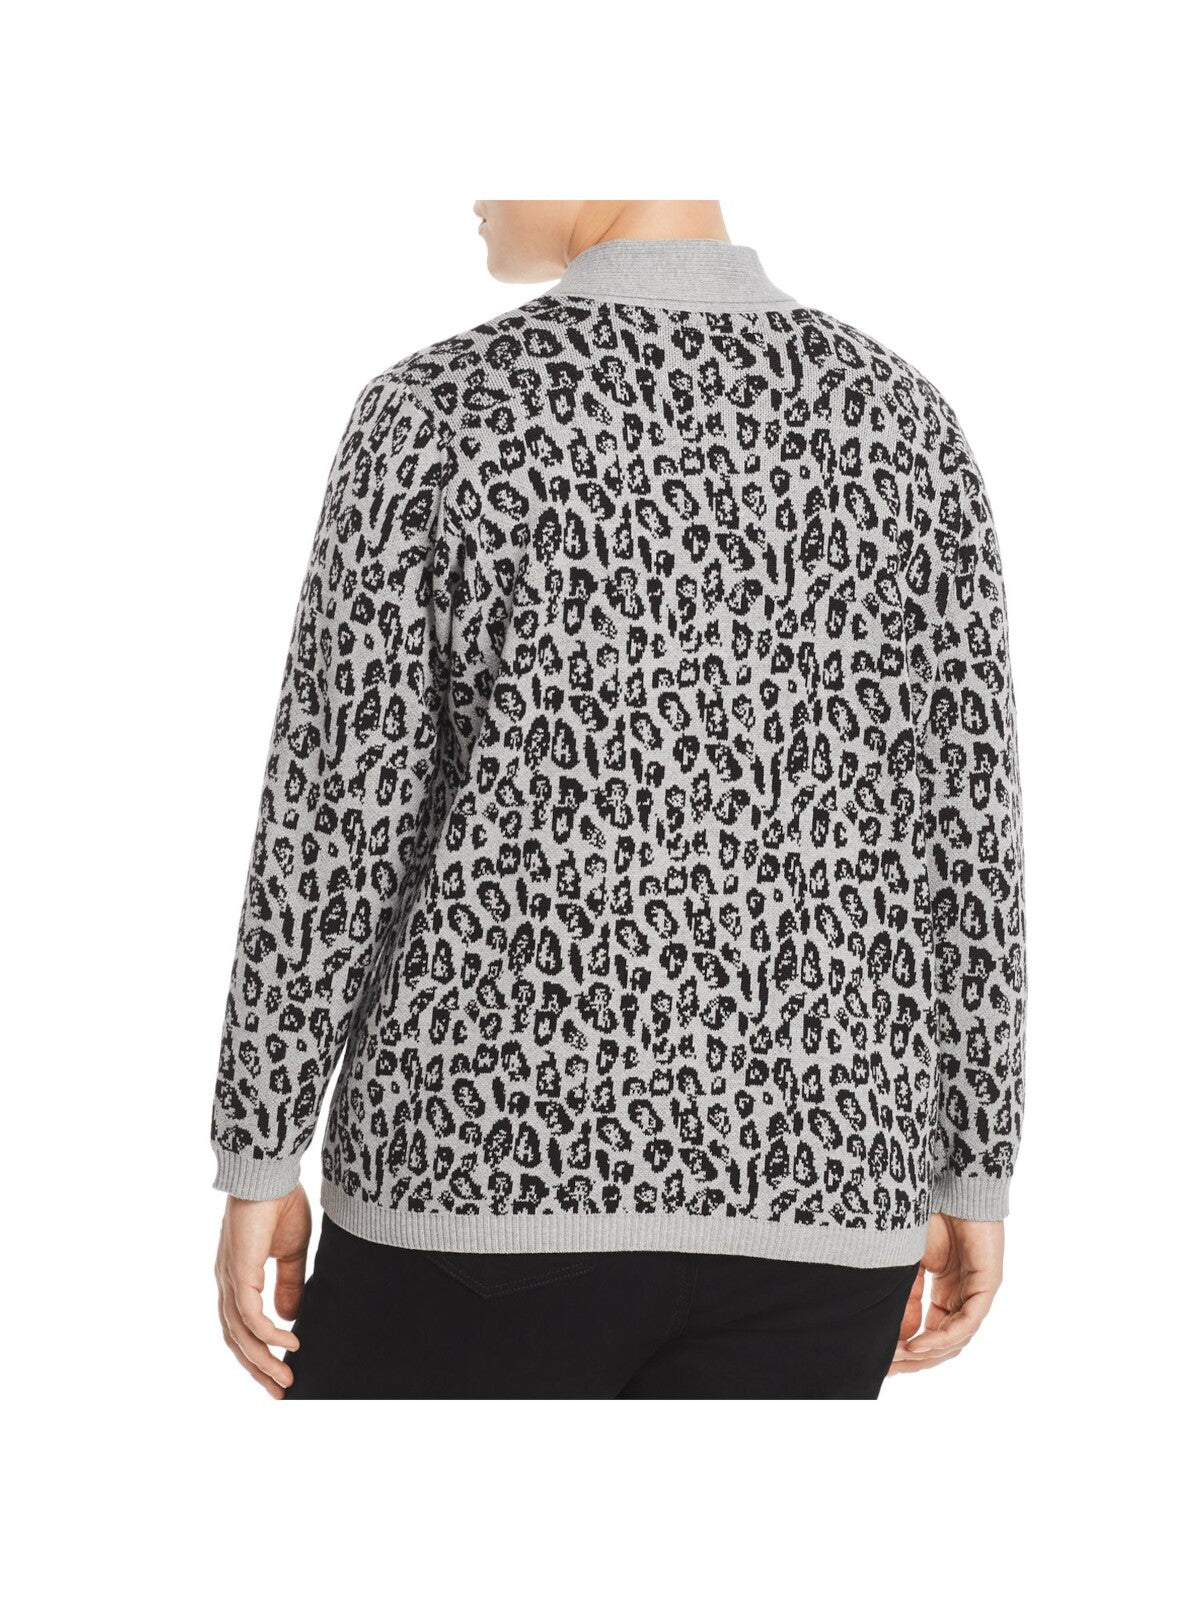 A + A COLLECTION Womens Gray Stretch Pocketed Animal Print Long Sleeve Open Front Sweater 1X